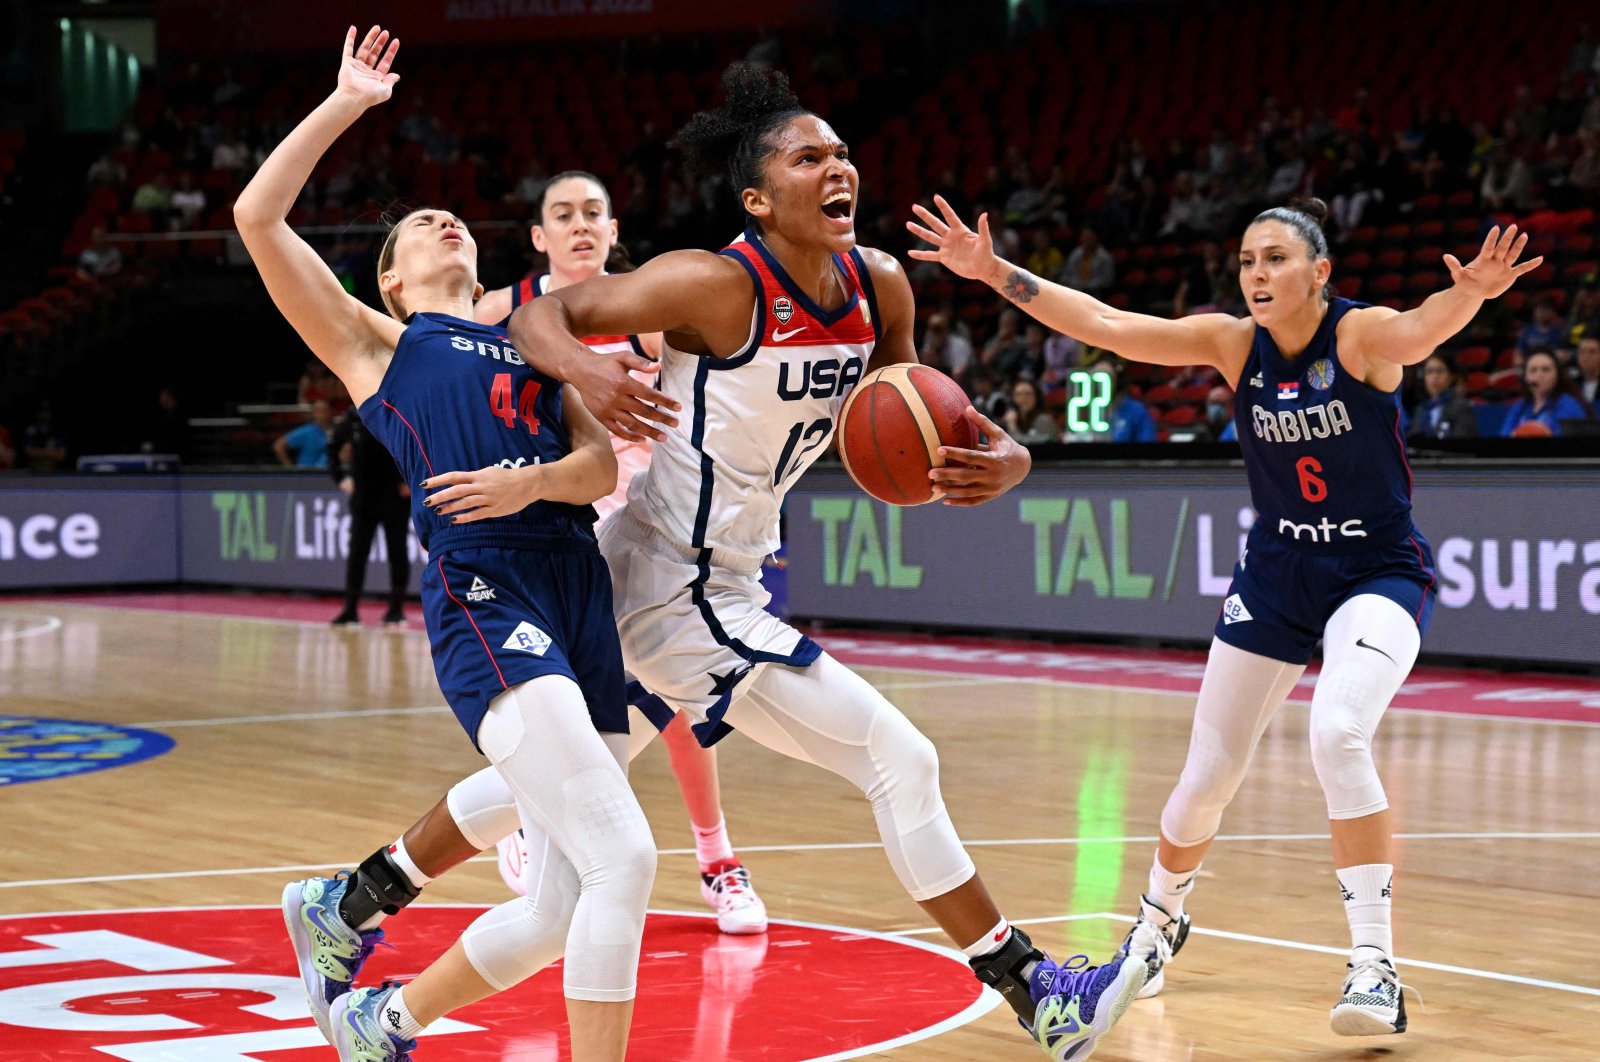 Alyssa Thomas (C) drives to the basket under the pressure from Serbia&#039;s Katarina Zec (L) during the first quarterfinal of the Women&#039;s Basketball World Cup game between Serbia and USA, Sydney, Australia, Sept. 29, 2022. (AFP Photo)